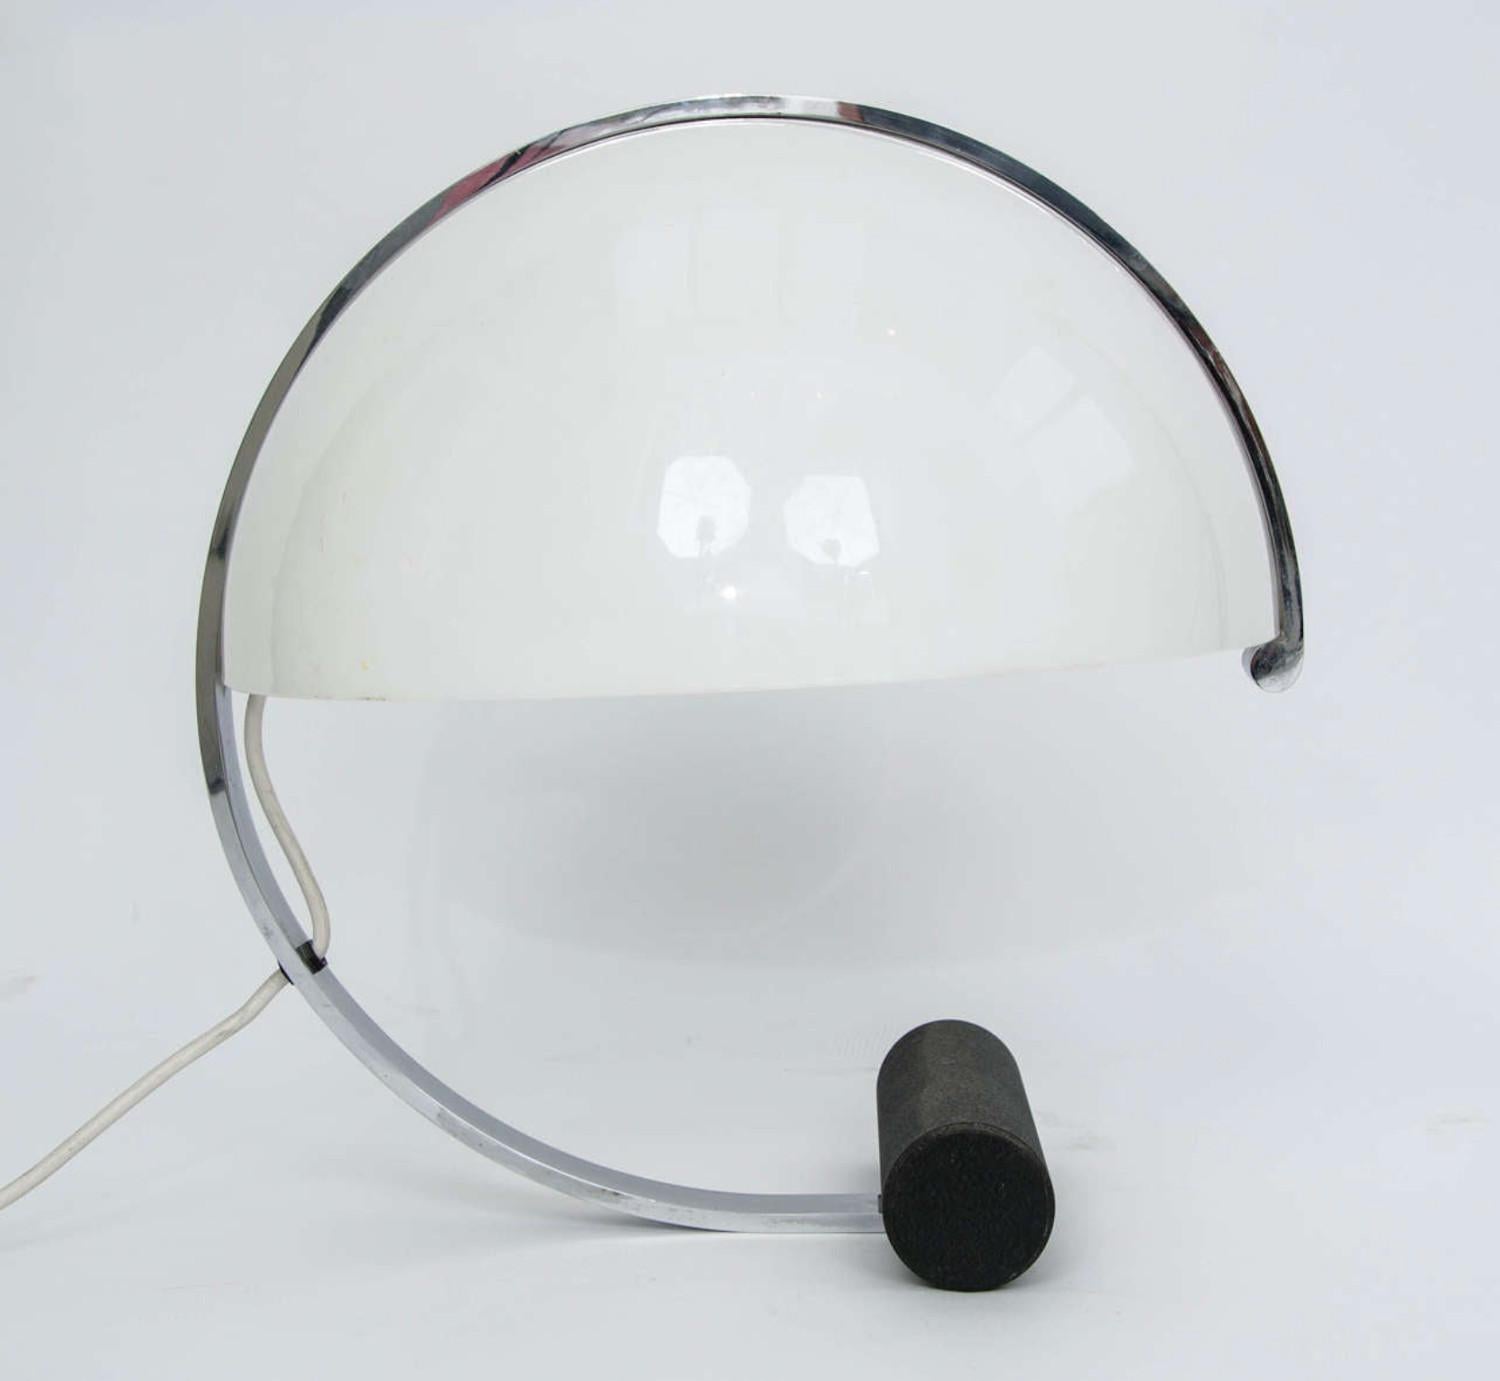 1970s table lamp with white acrylic shade, chrome frame and heavy black steel base. A high quality piece by Stilnovo of Italy. This design was distributed by the Dutch company Artimeta, and featured in their catalogue. The white acrylic shade